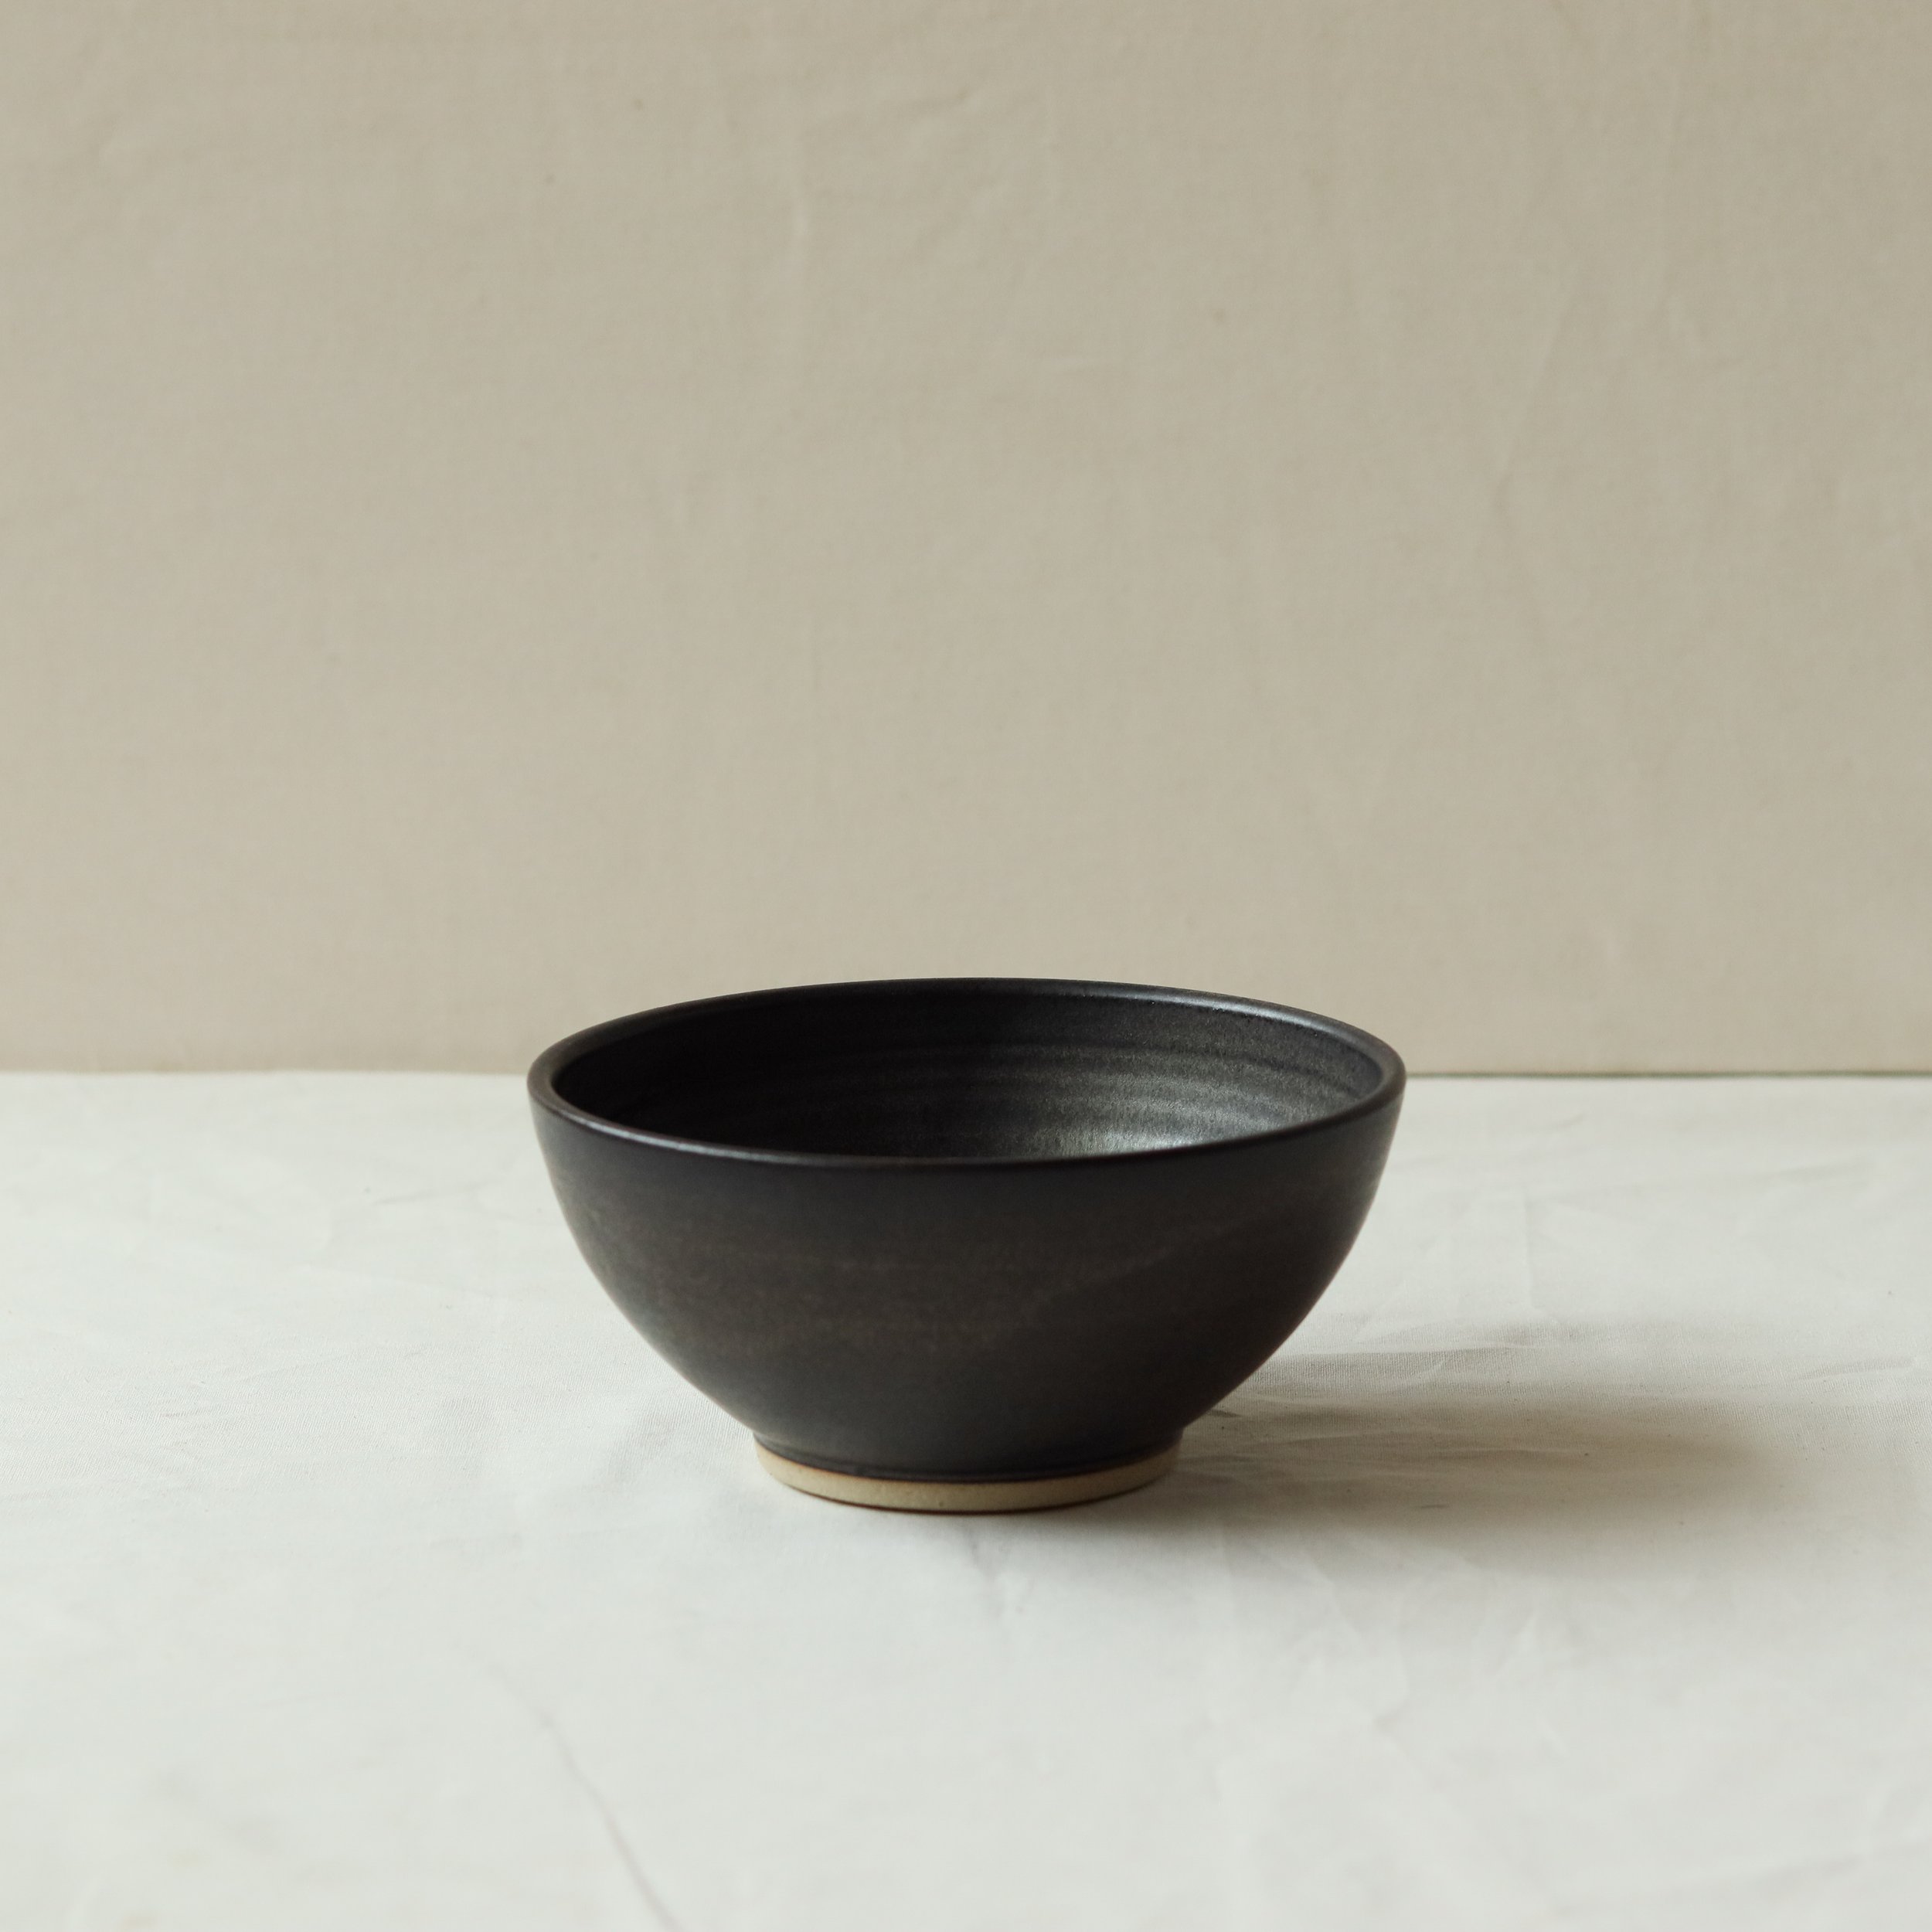 Cereal bowl in Charcoal, Flecked Stoneware-4-2.jpg